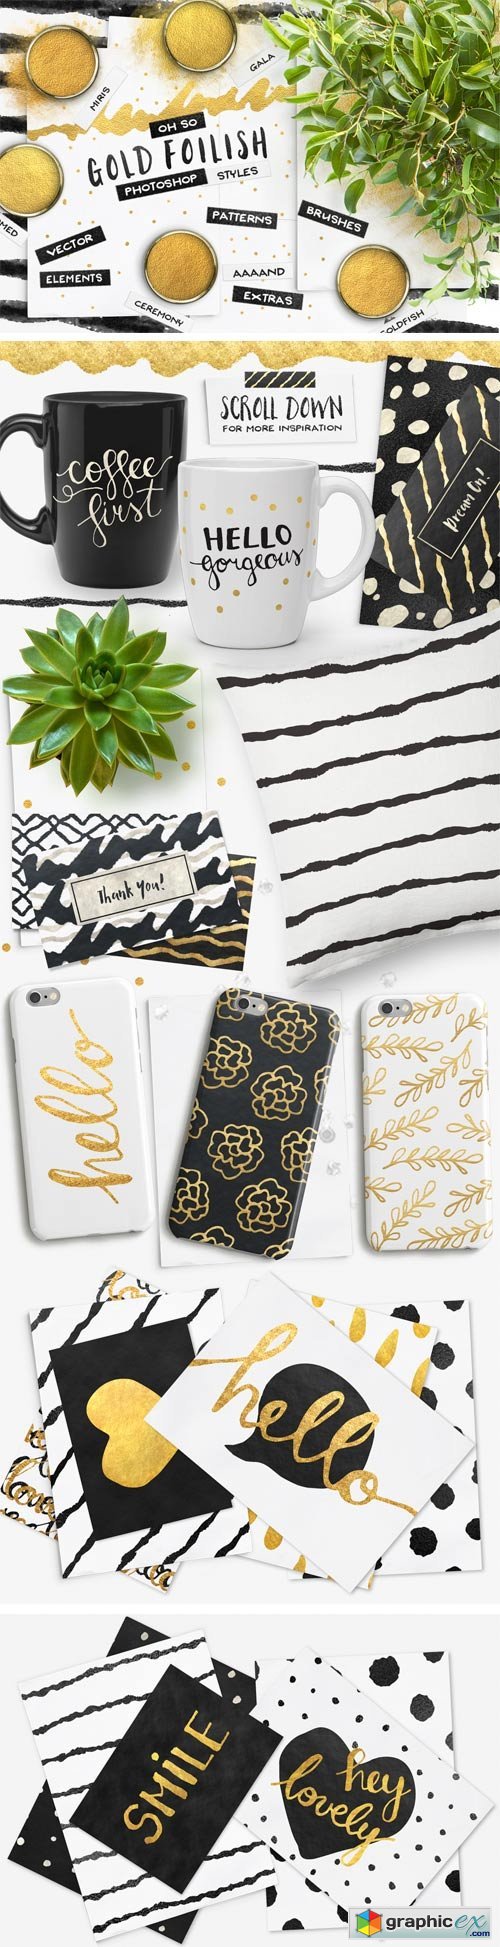 Gold Foil Styles + EXTRAS!